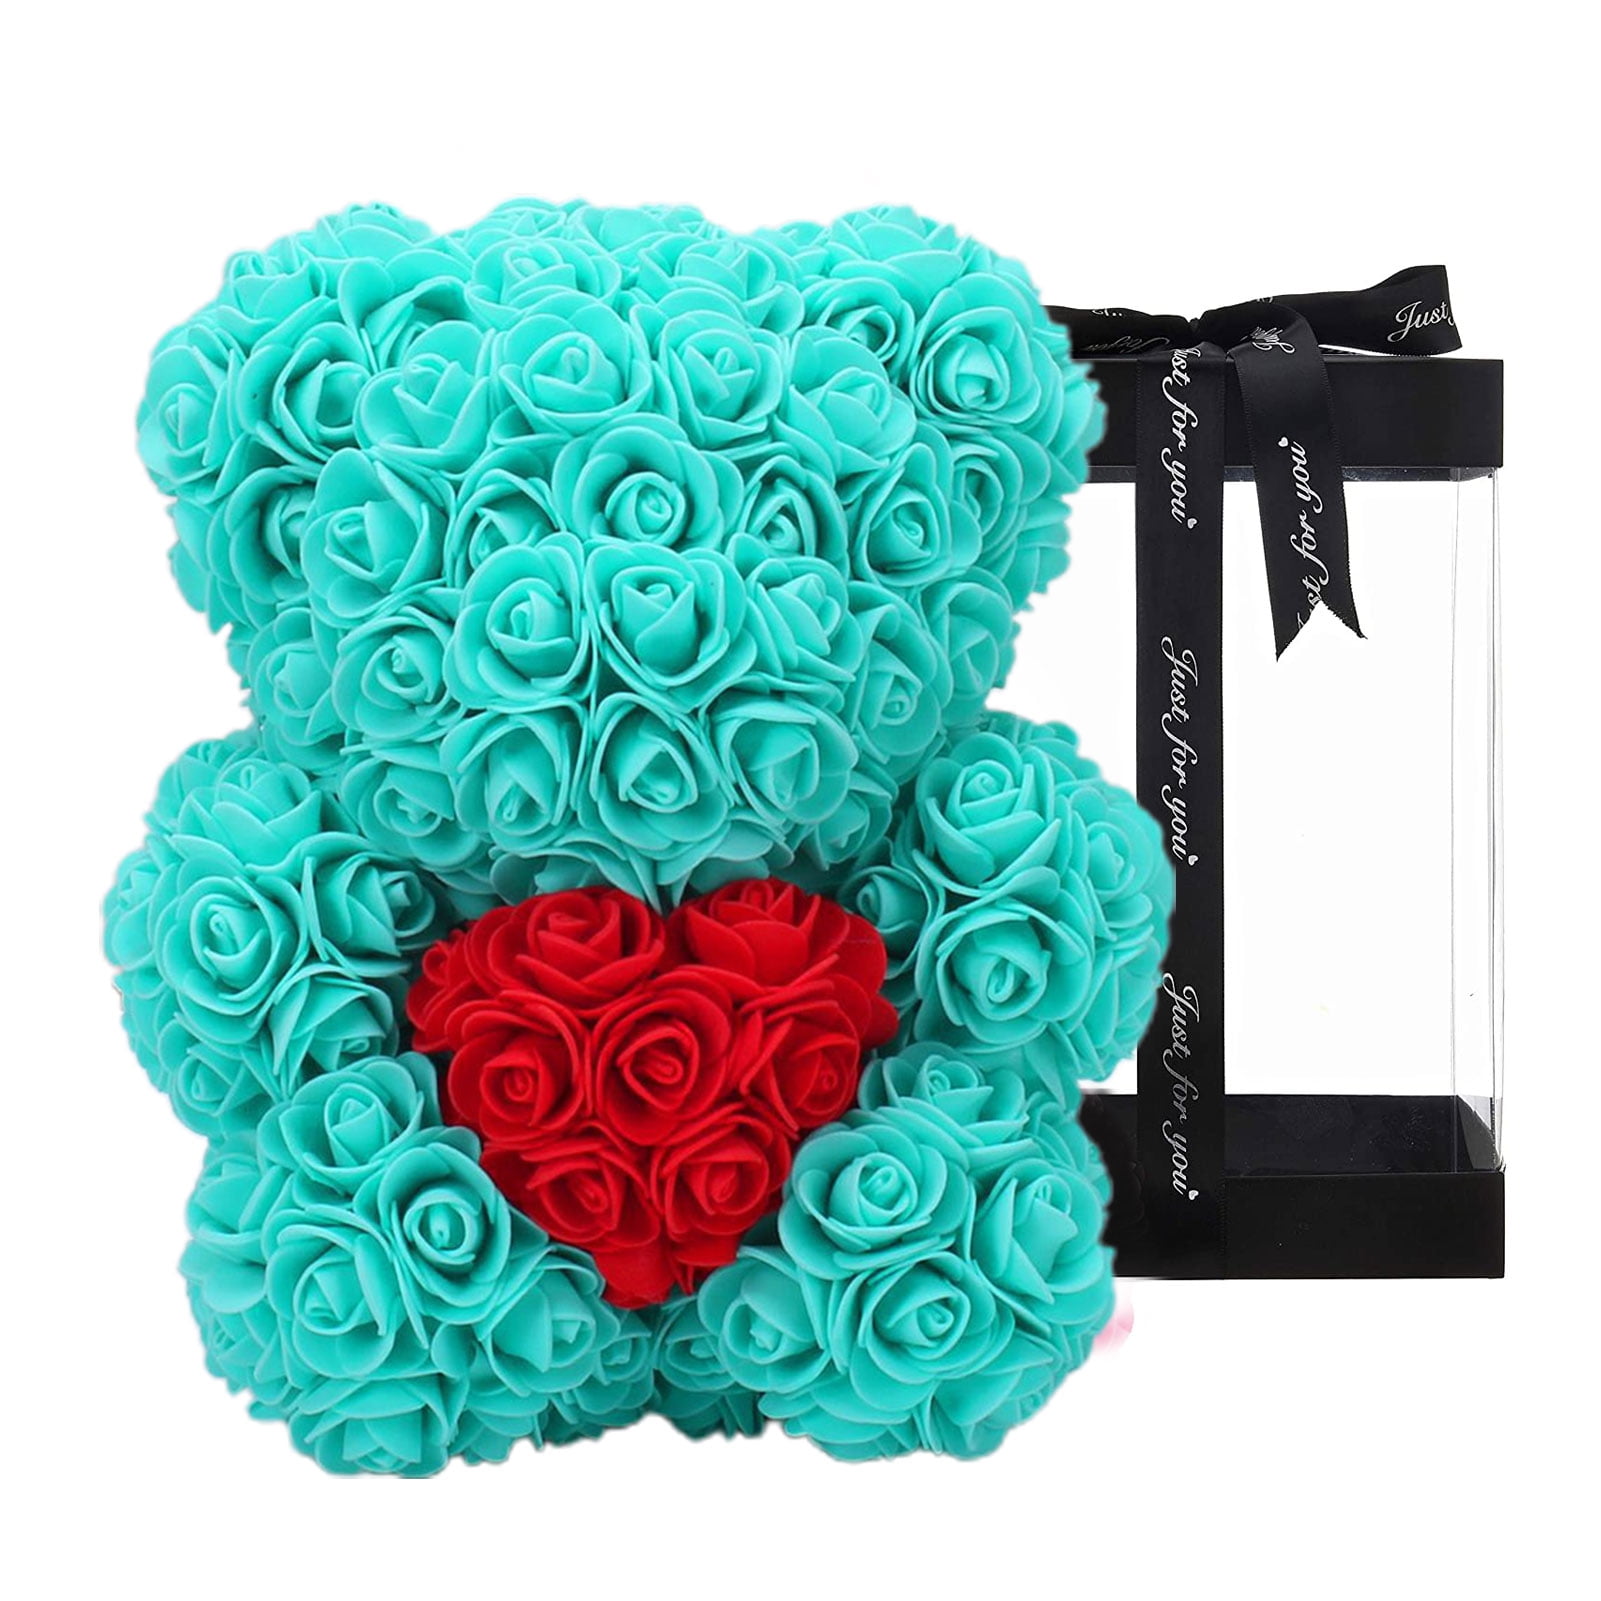 Details about   Beauty and The Beast Forever Flower Rose in Glass LED Light Mothers Day Gifts US 